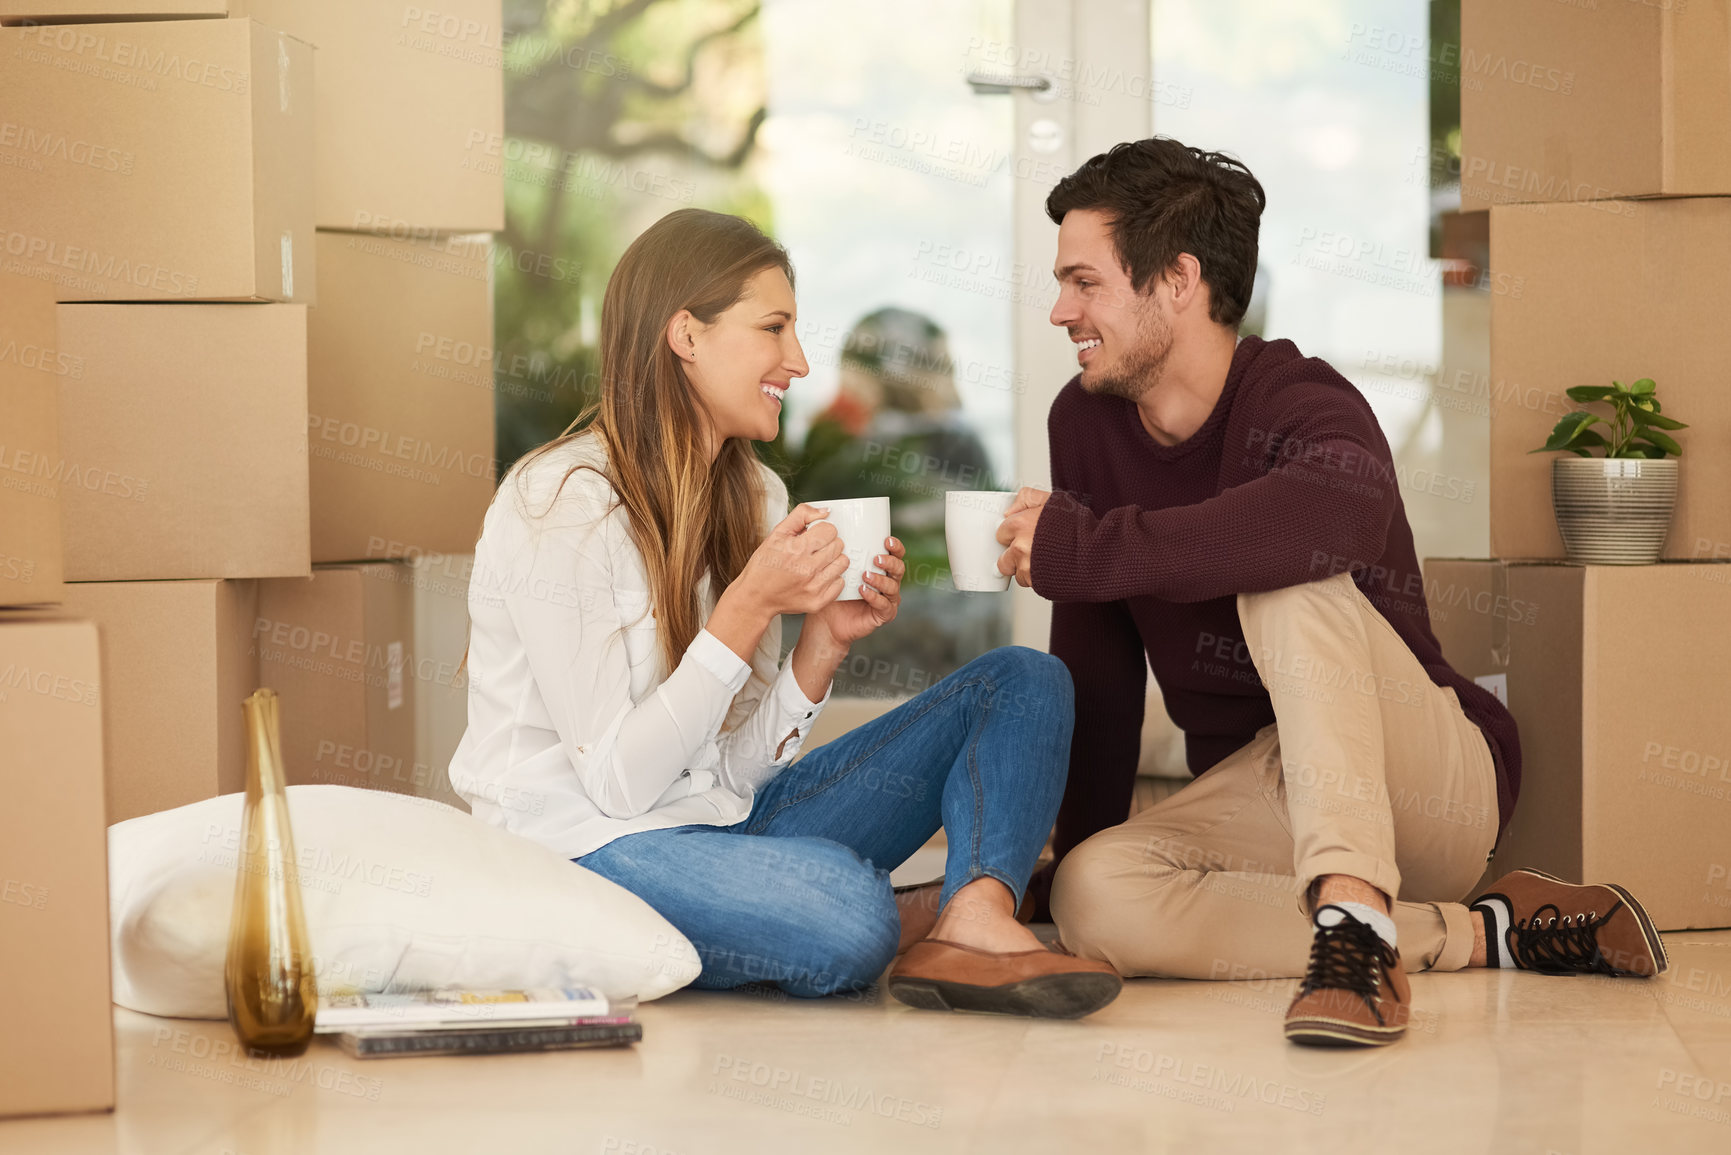 Buy stock photo Shot of an affectionate young couple taking a coffee break while moving into a new home